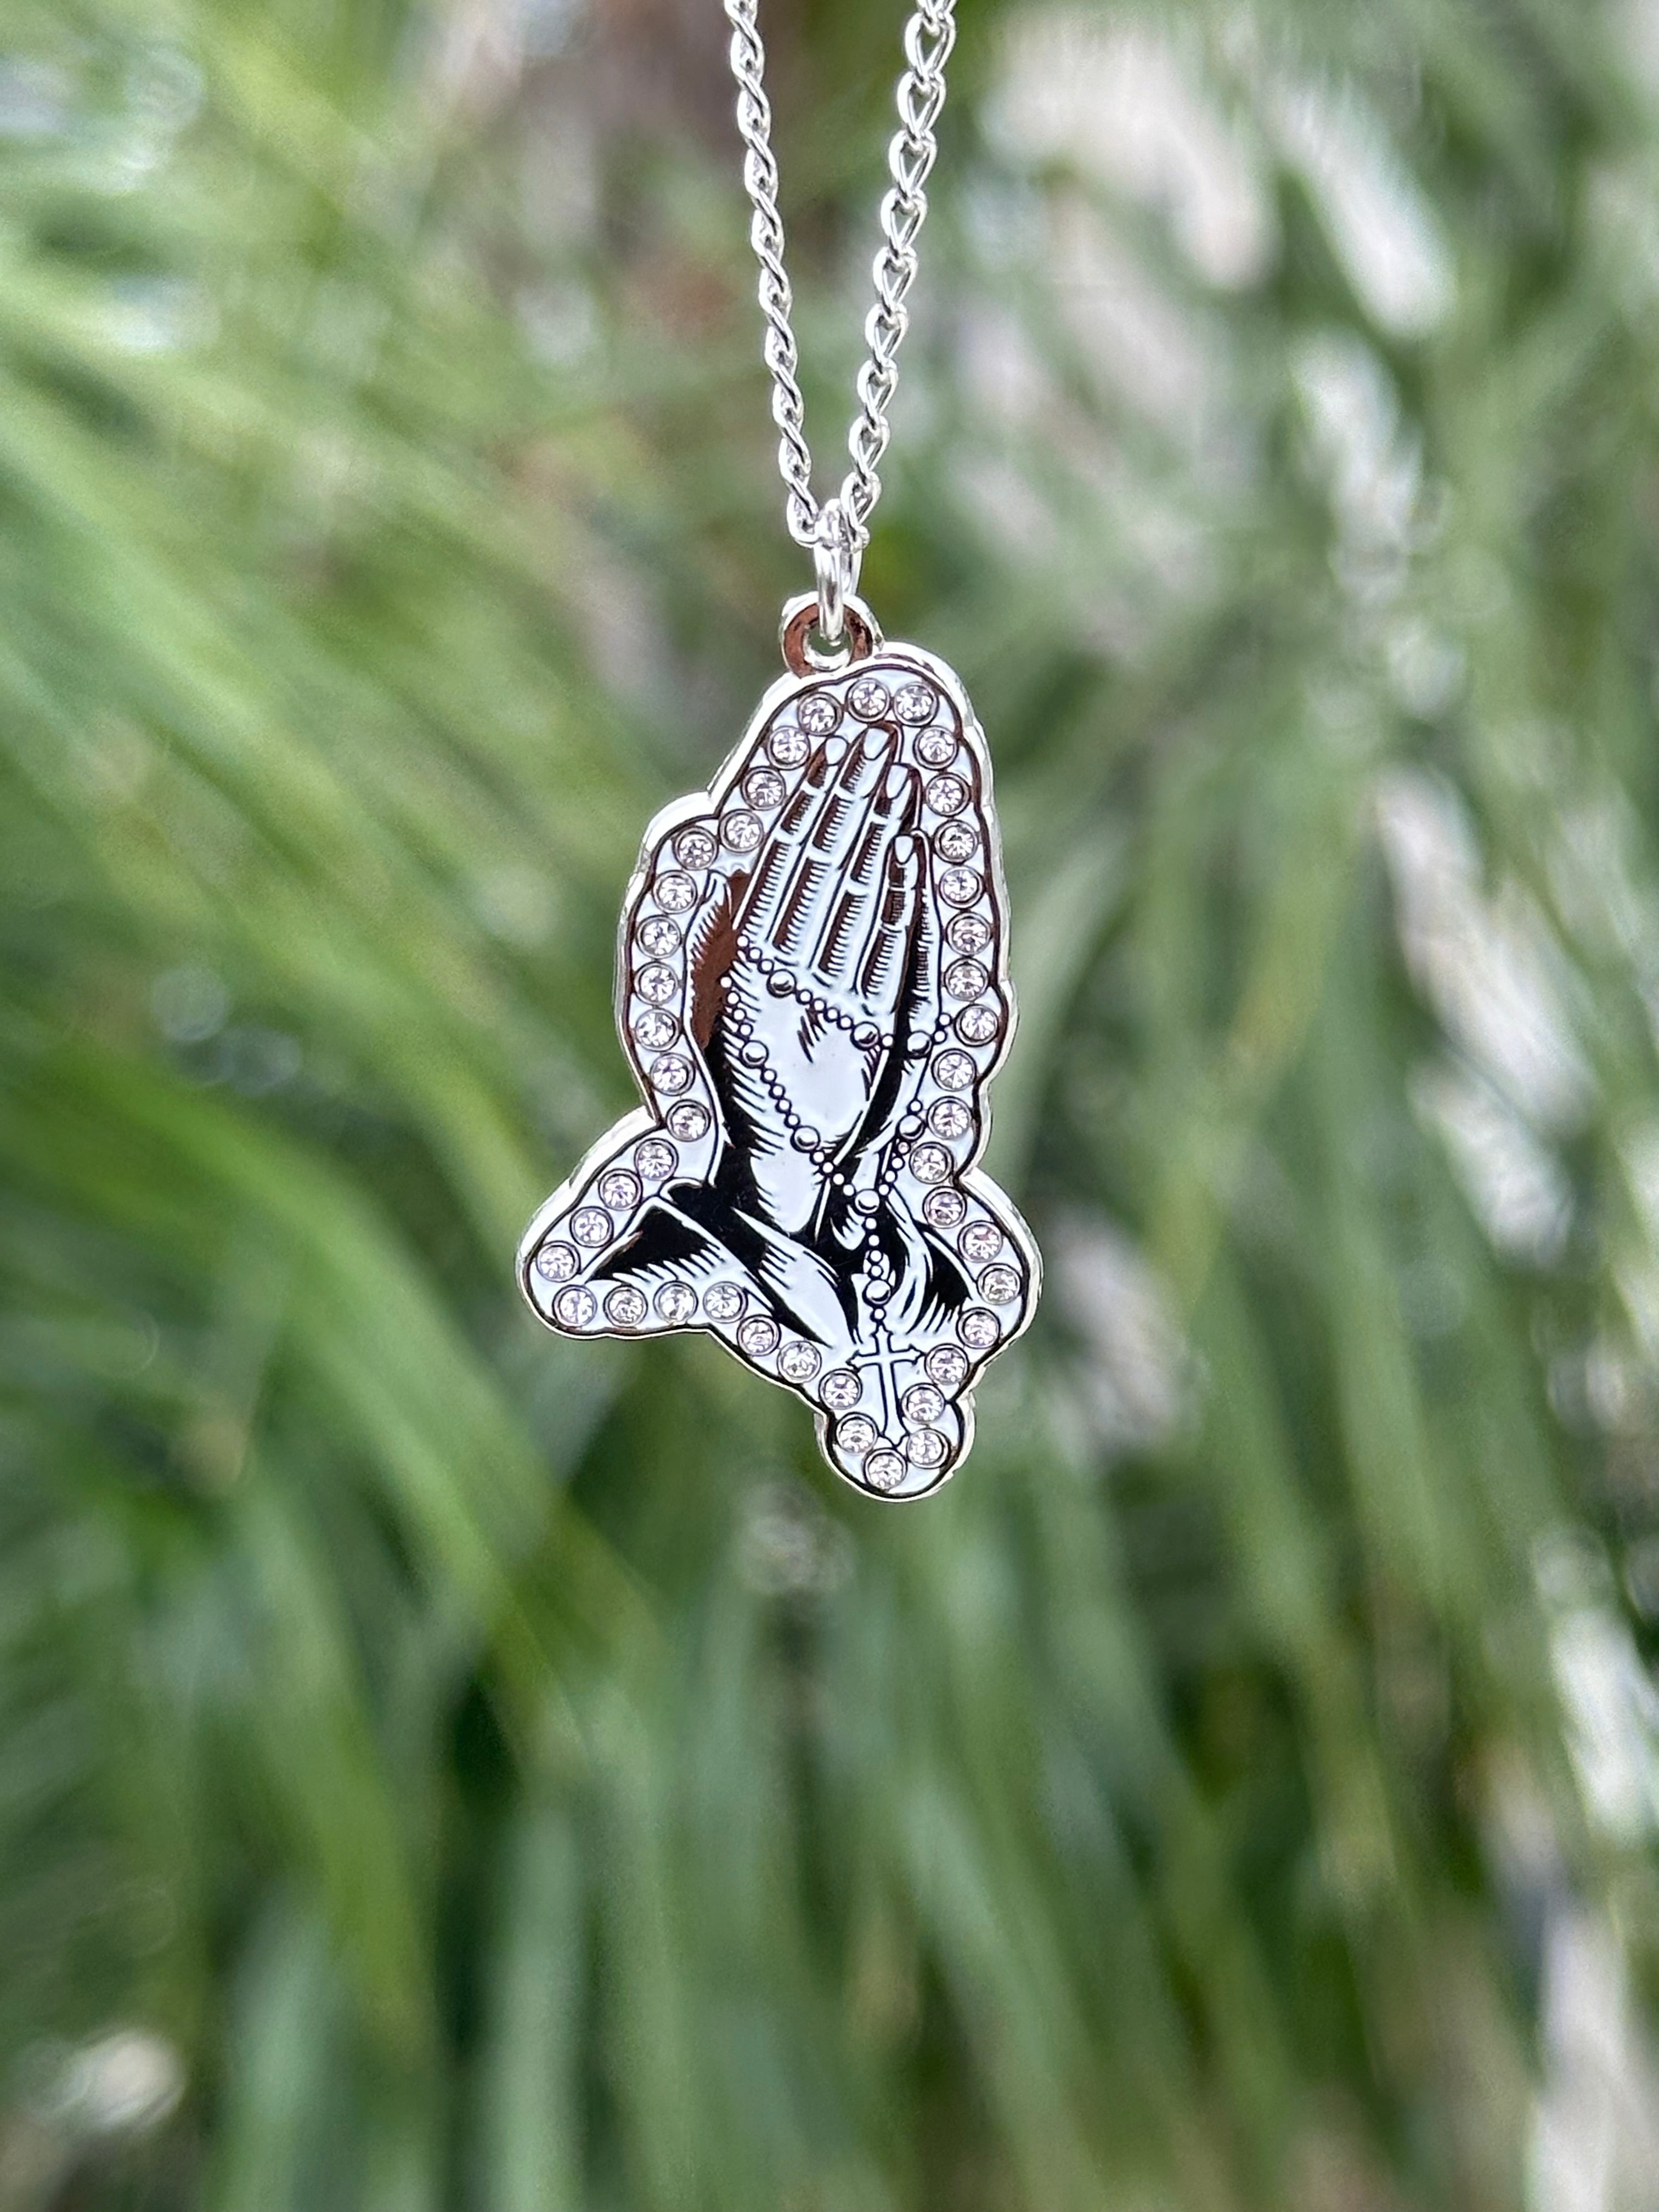 *NEW SILVER "PRAYING HANDS" ICED OUT CHAIN W/ RHINESTONES VERY LIMITED